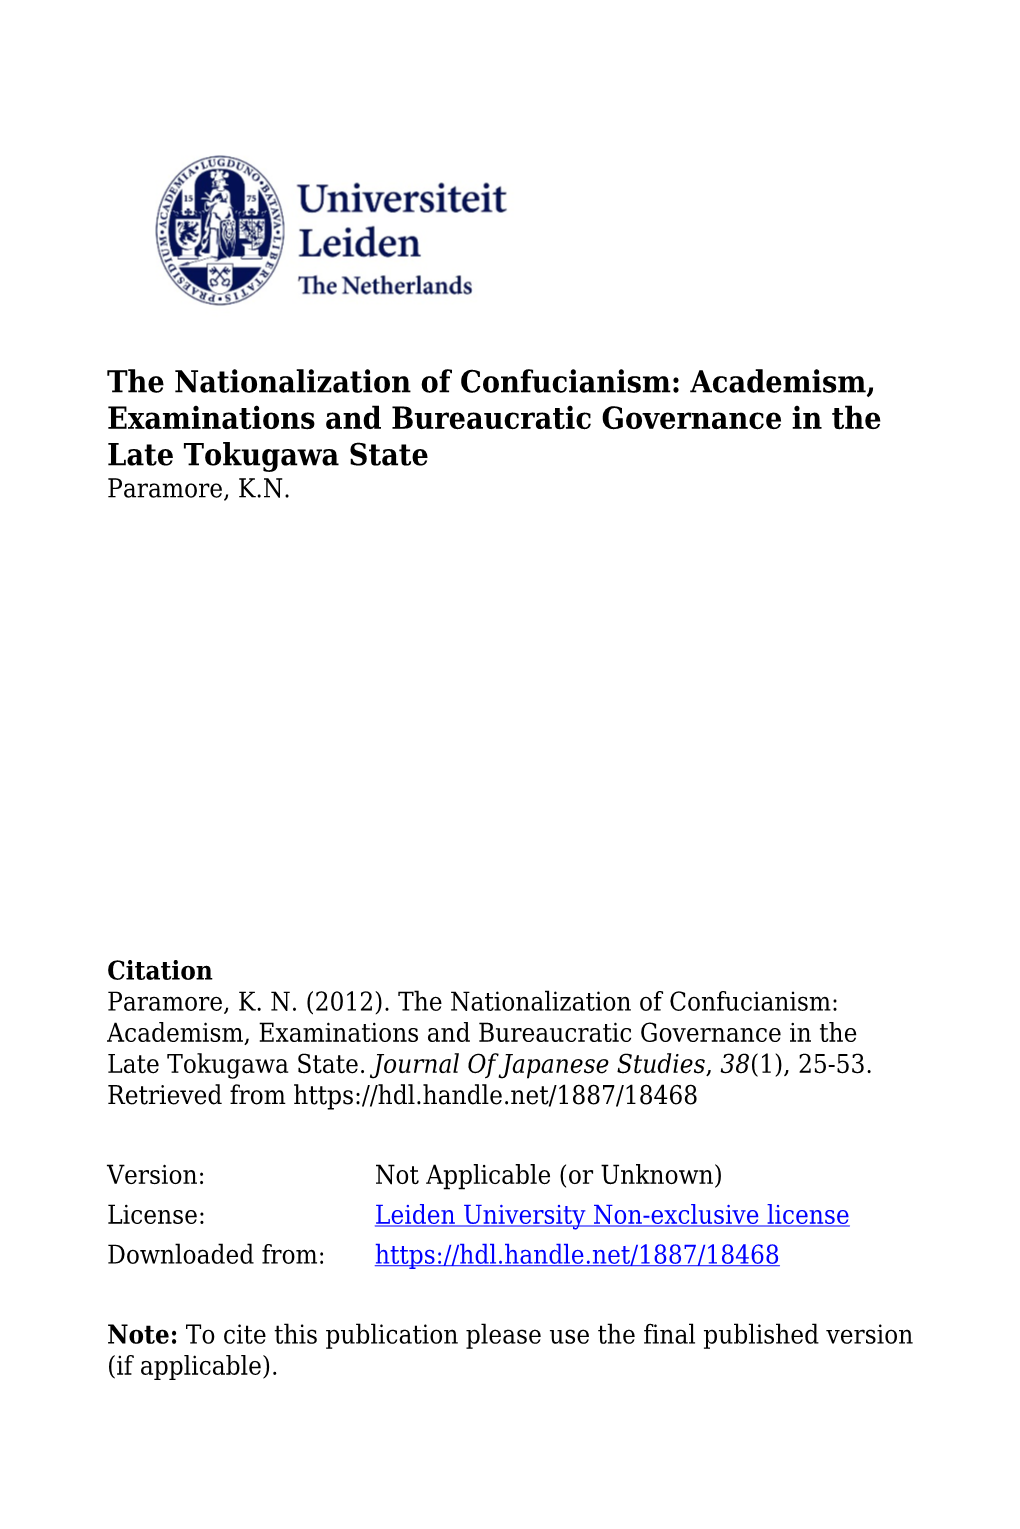 Kiri Paramore the Nationalization of Confucianism: Academism, Examinations, and Bureaucratic Governance in the Late Tokugawa State